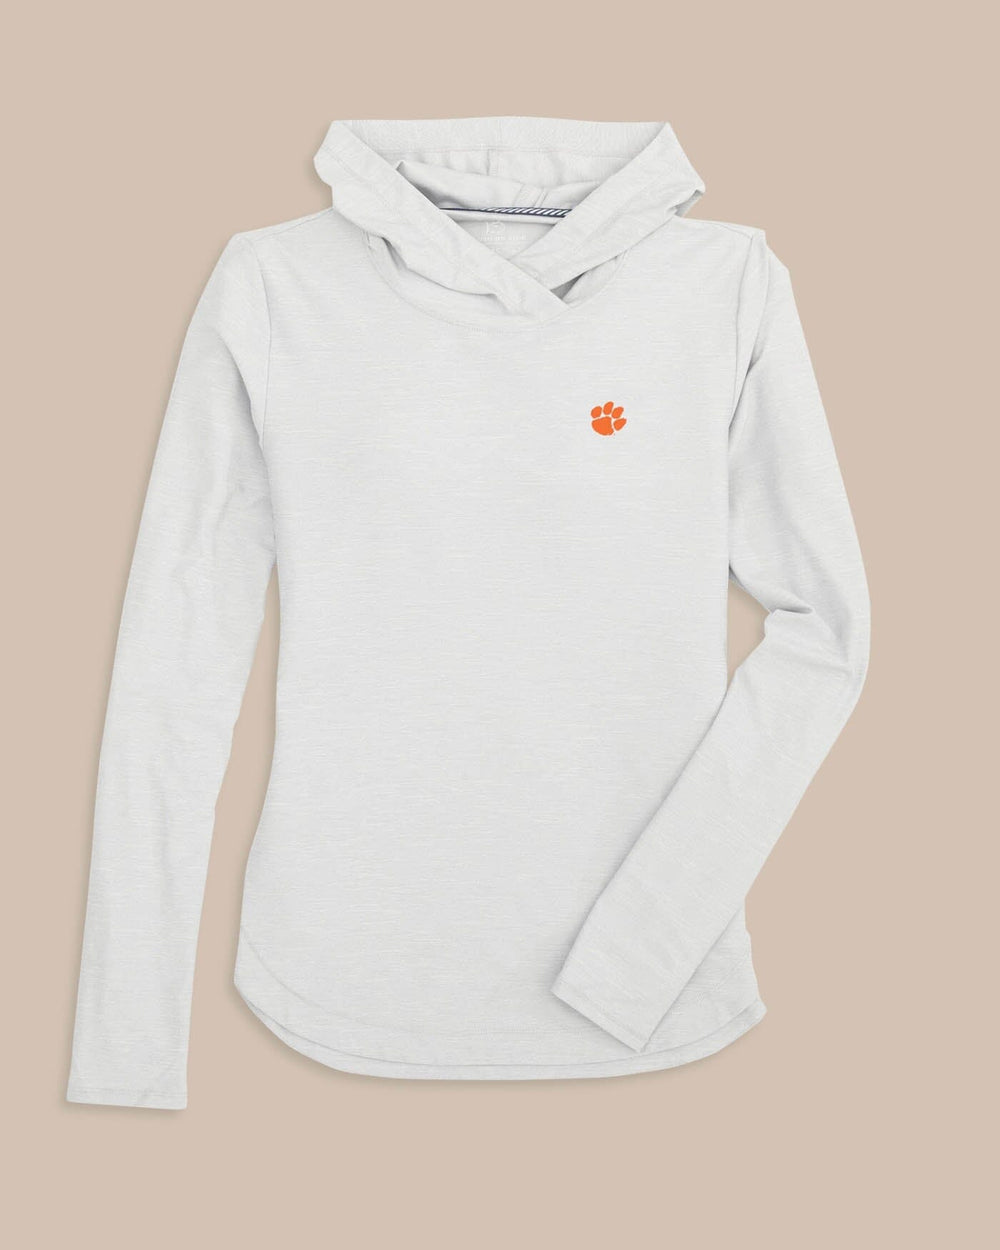 The front view of the Clemson Tigers Linley brrr°®-illiant Performance Hoodie by Southern Tide - Platinum Grey